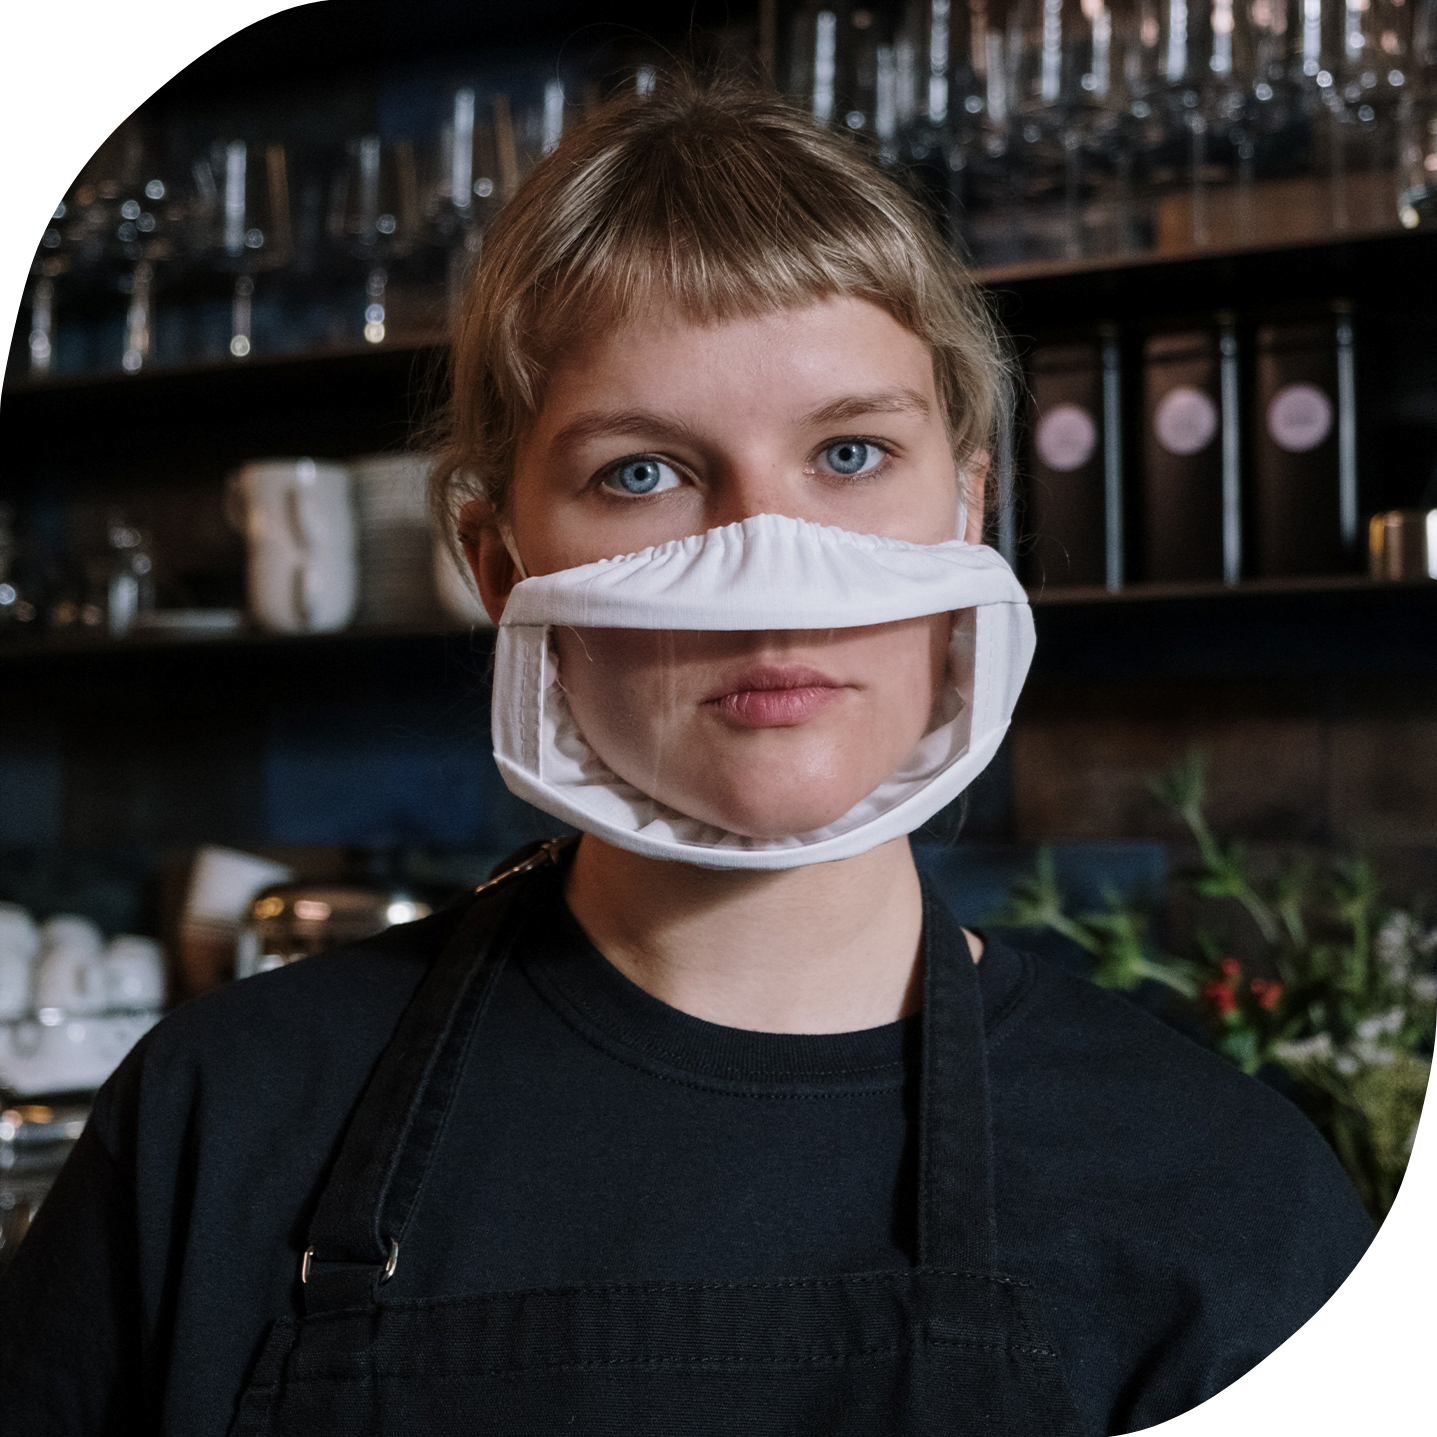 A white person who is deaf and wearing a clear mask working at a bar